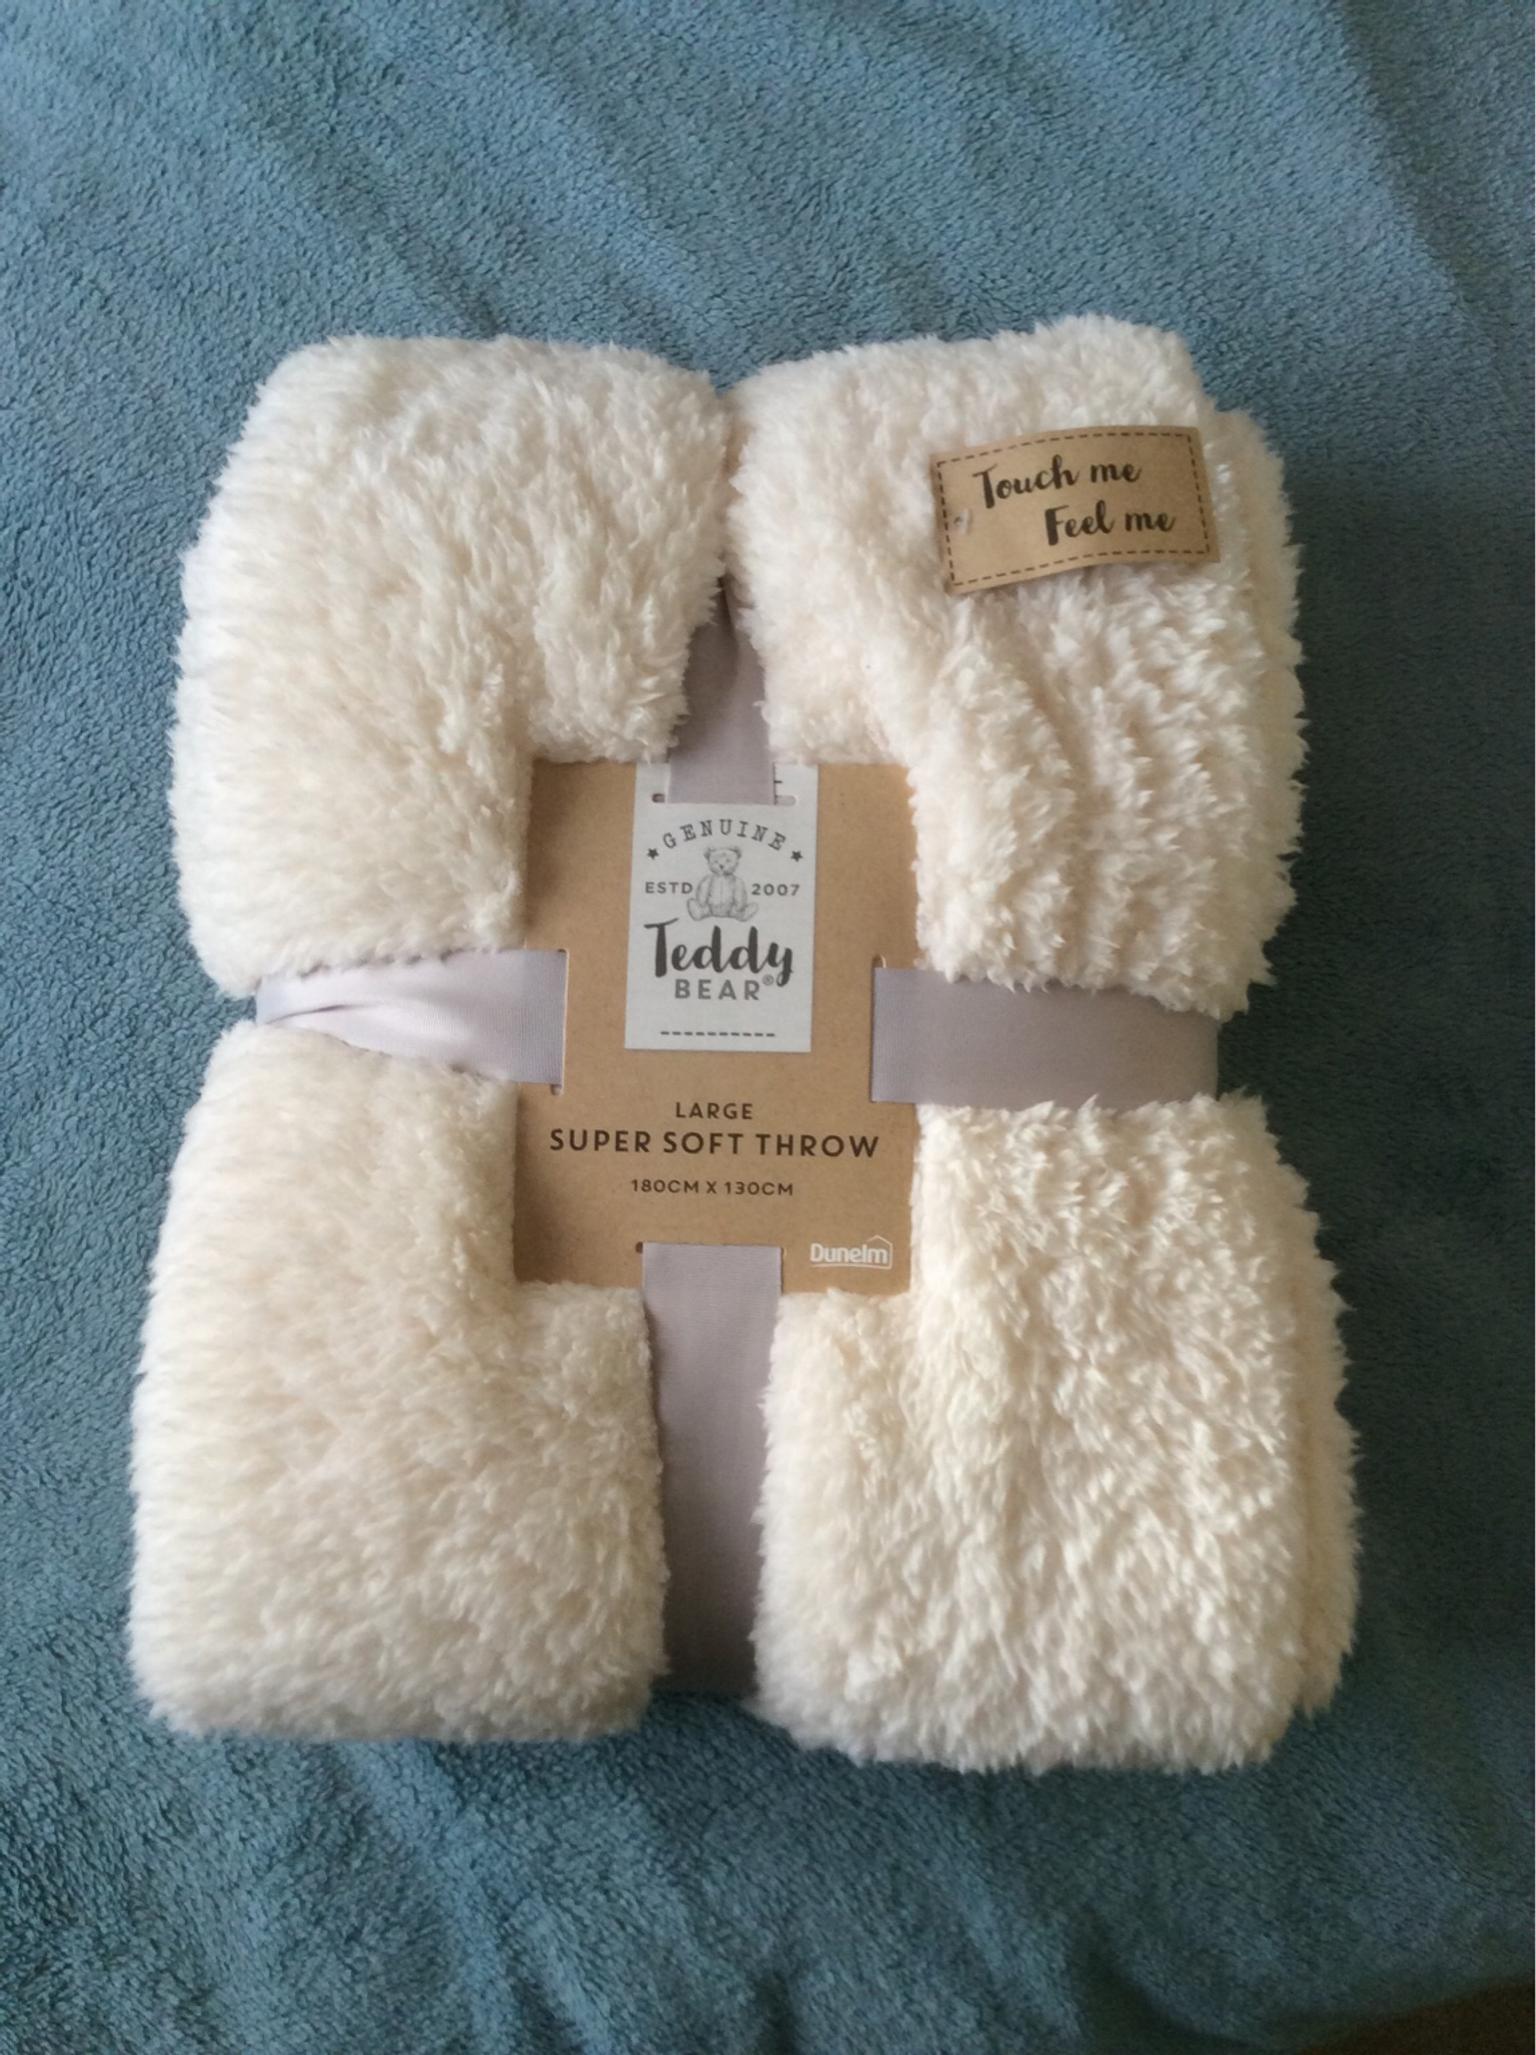 Super Soft Large Teddy Bear Throw In DA1 Bexley For 700 For Sale Shpock